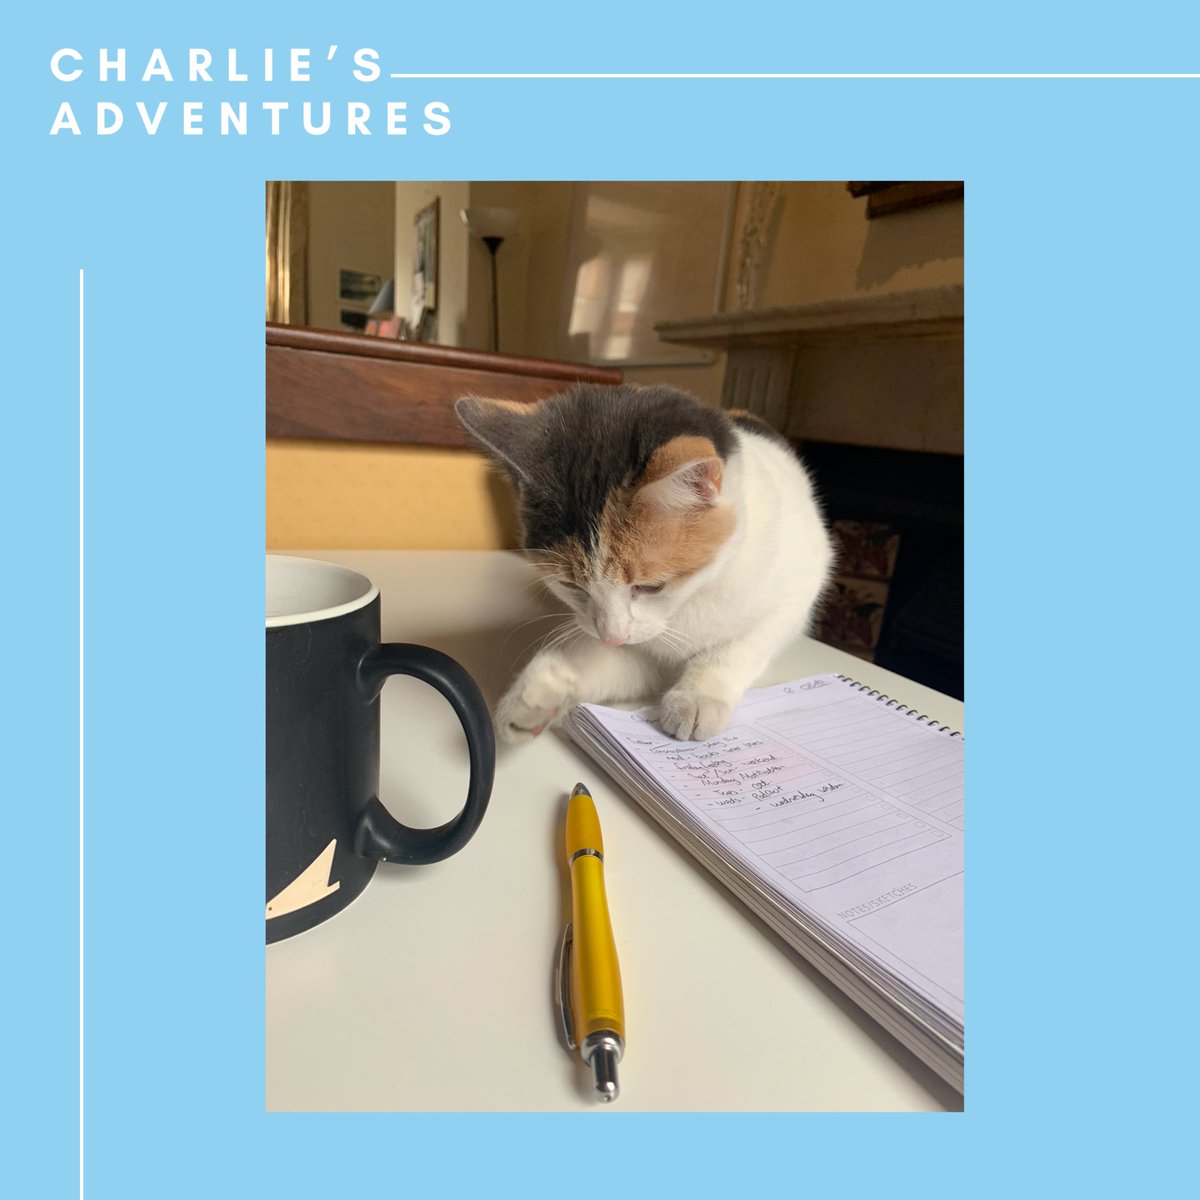 Charlie’s “helping out” in the office today 🐱 #CatsinPublishing #CatsOfTwitter #CharliesAdventures